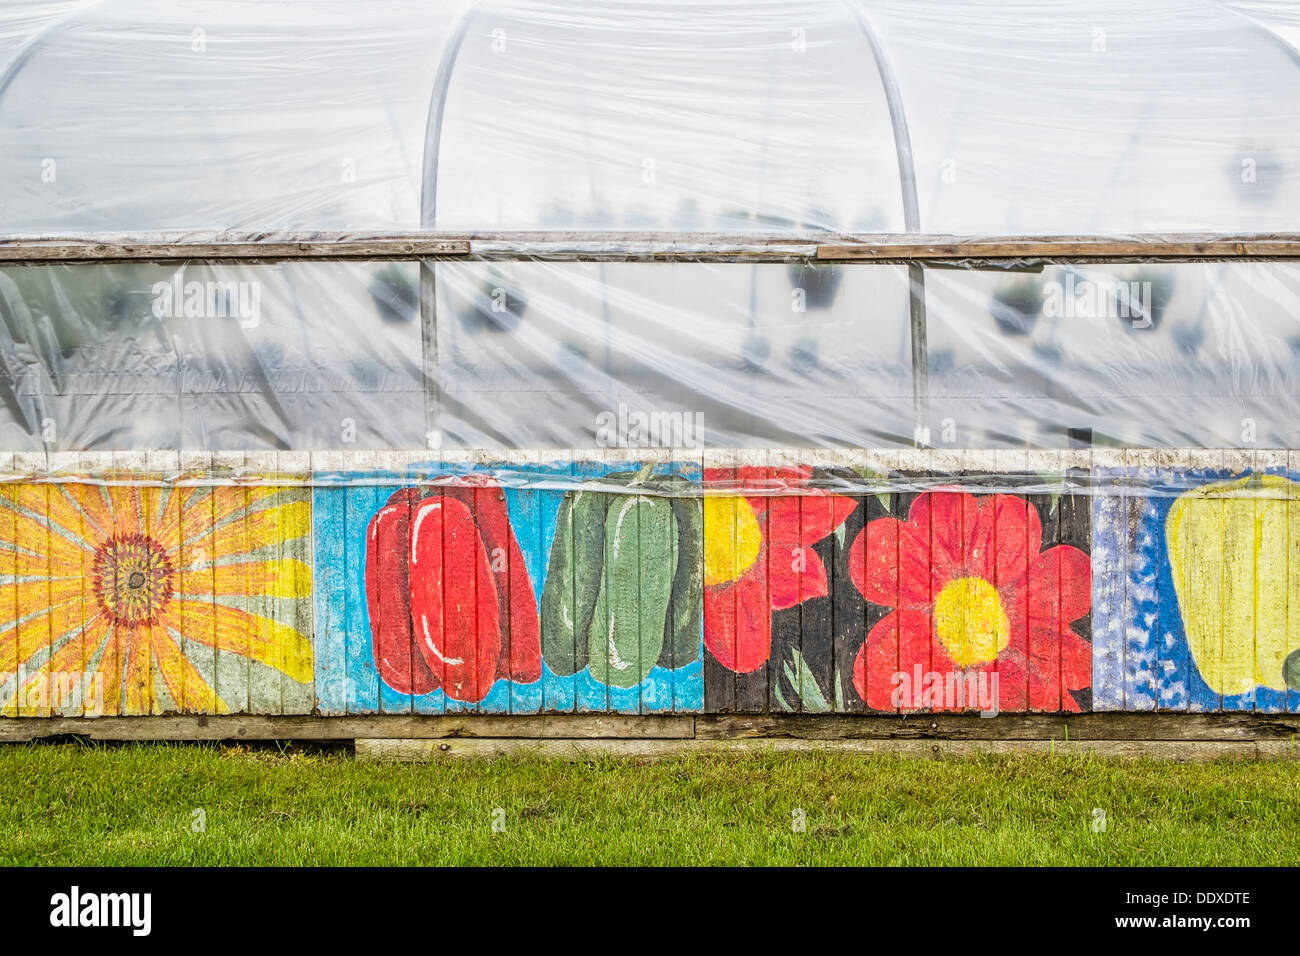 Exterior greenhouse wall painted with vegetables and flowers, Oregon Stock Photo